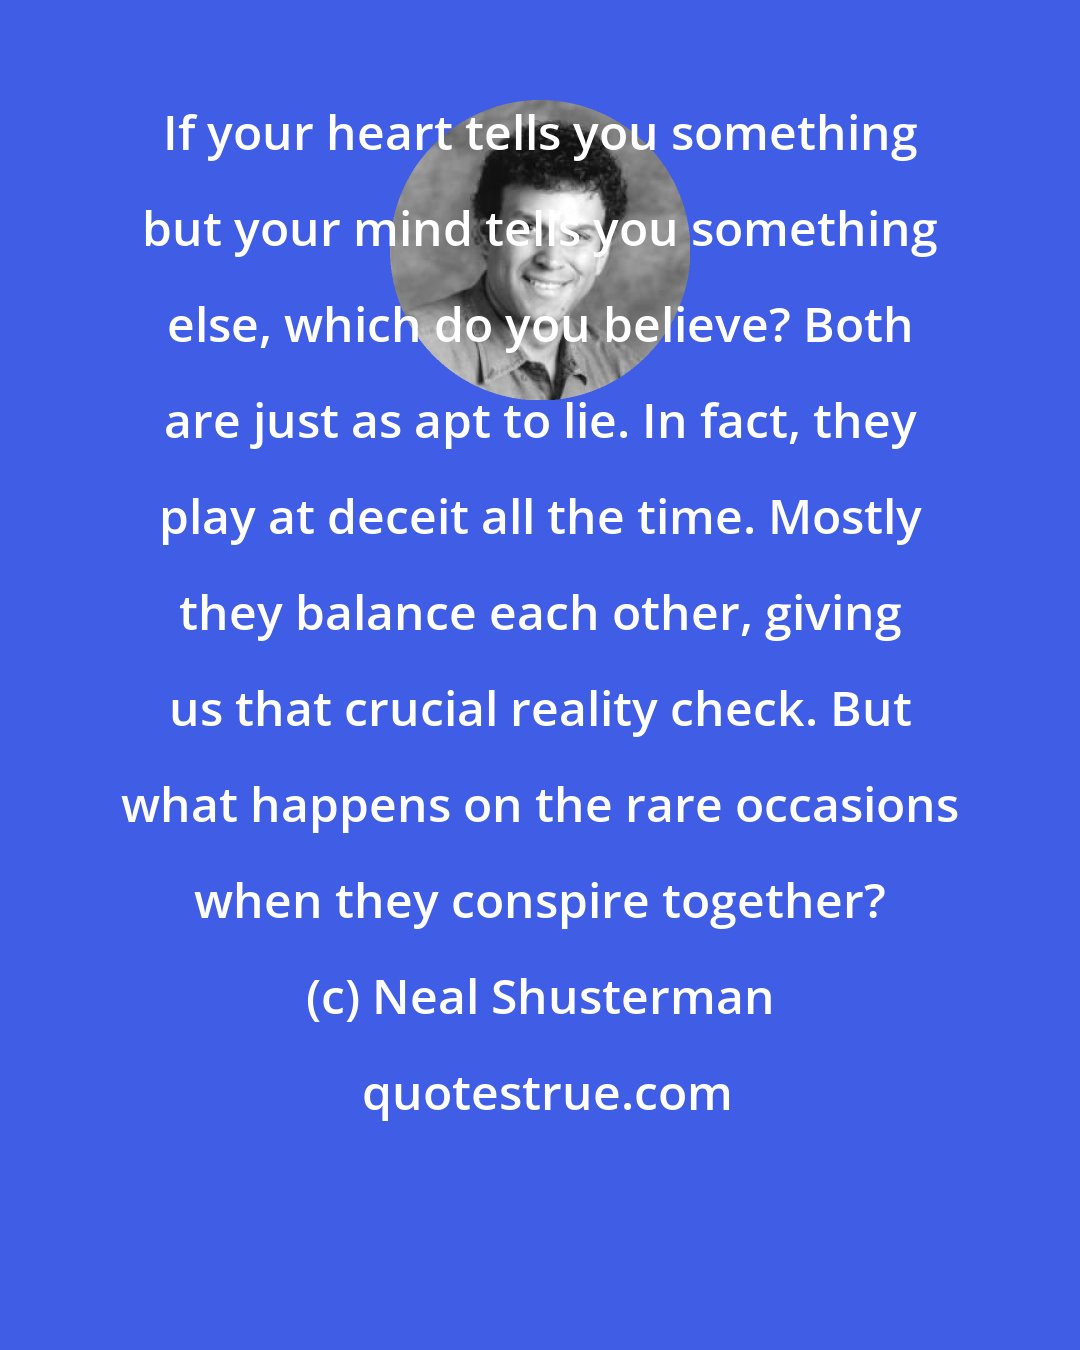 Neal Shusterman: If your heart tells you something but your mind tells you something else, which do you believe? Both are just as apt to lie. In fact, they play at deceit all the time. Mostly they balance each other, giving us that crucial reality check. But what happens on the rare occasions when they conspire together?